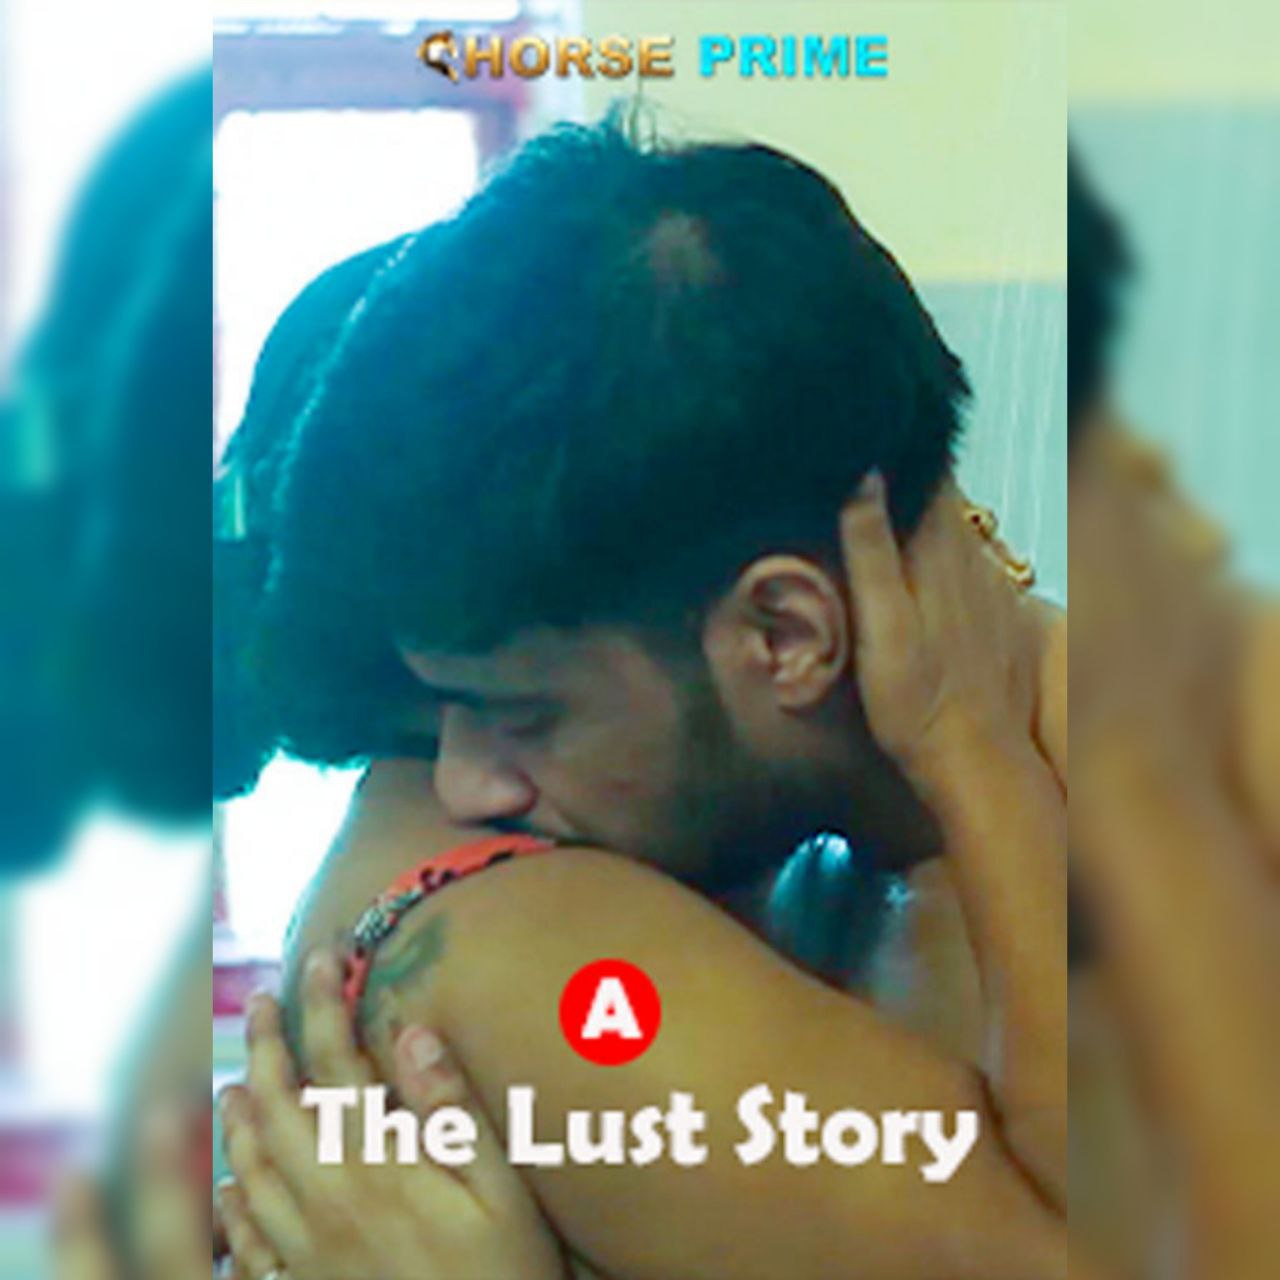 The lust story